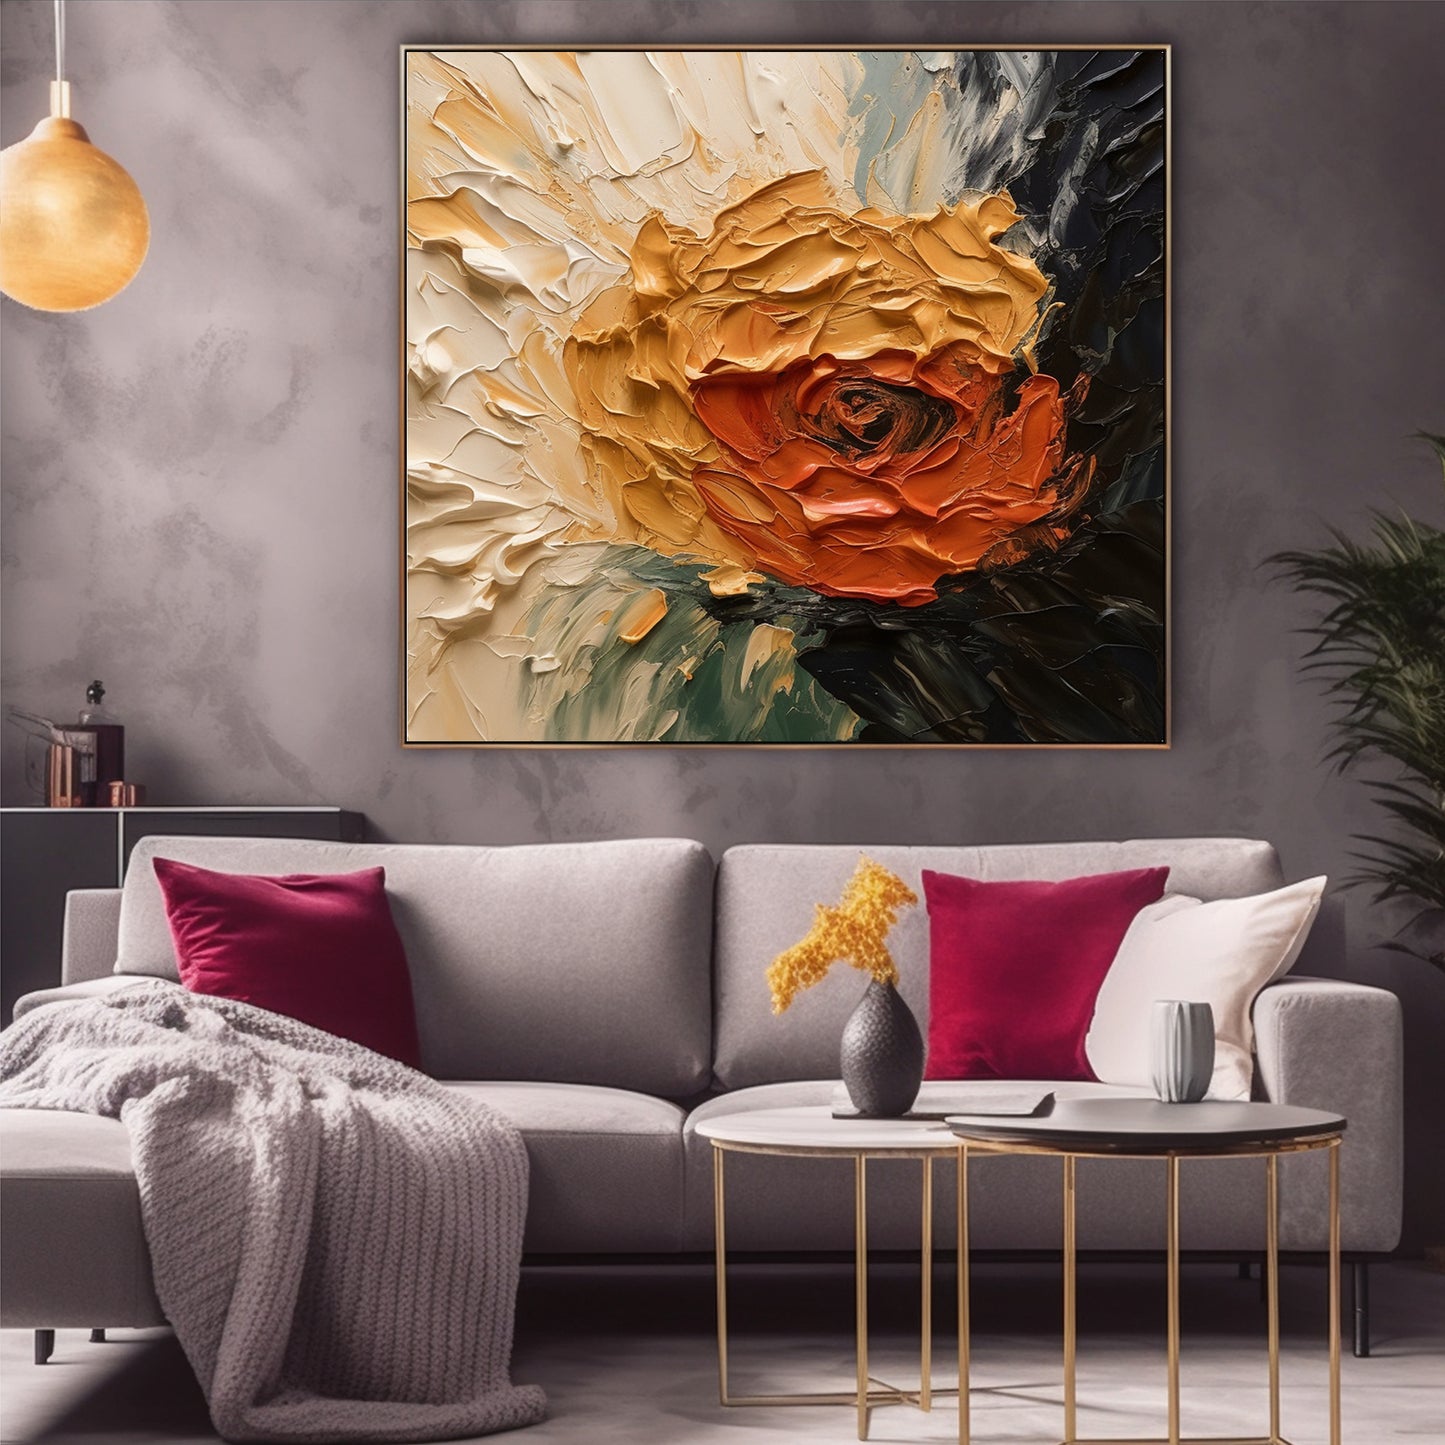 Texture Wall Decor Home Decor Gift Abstract Floral Painting  F0416BRT2330